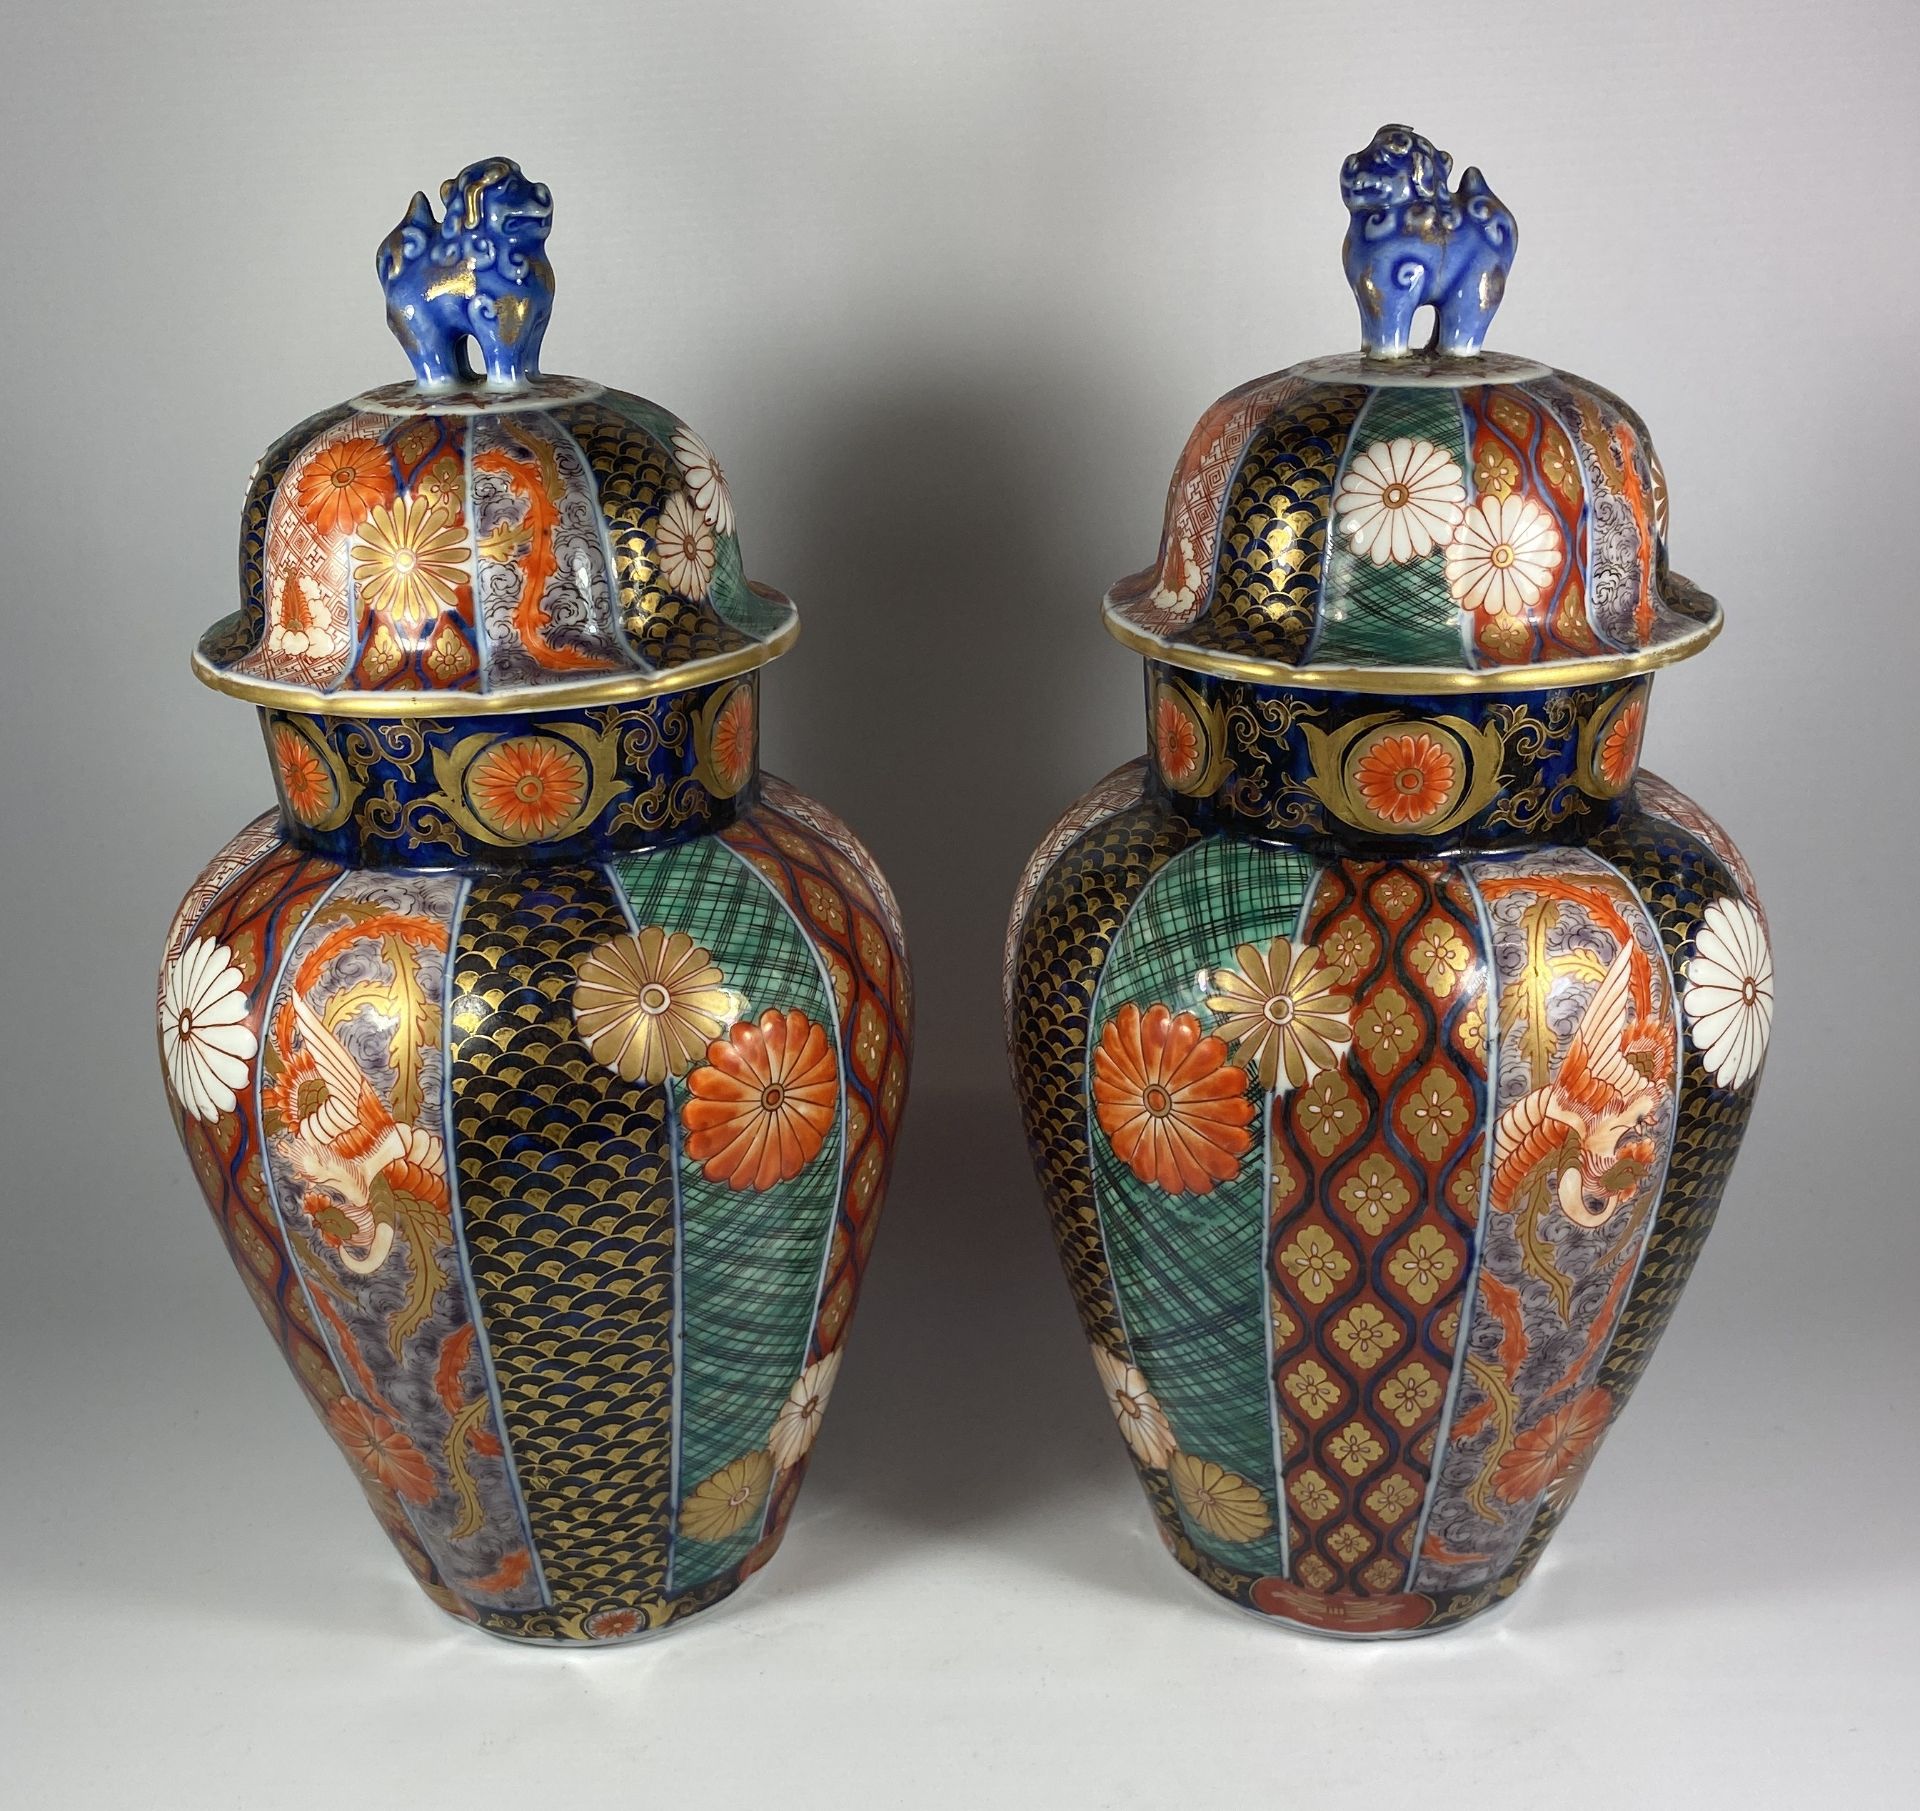 A PAIR OF JAPANESE IMARI MEIJI PERIOD (1868-1912) OVOID FORM LIDDED JARS WITH FOO DOG FINIALS (ONE